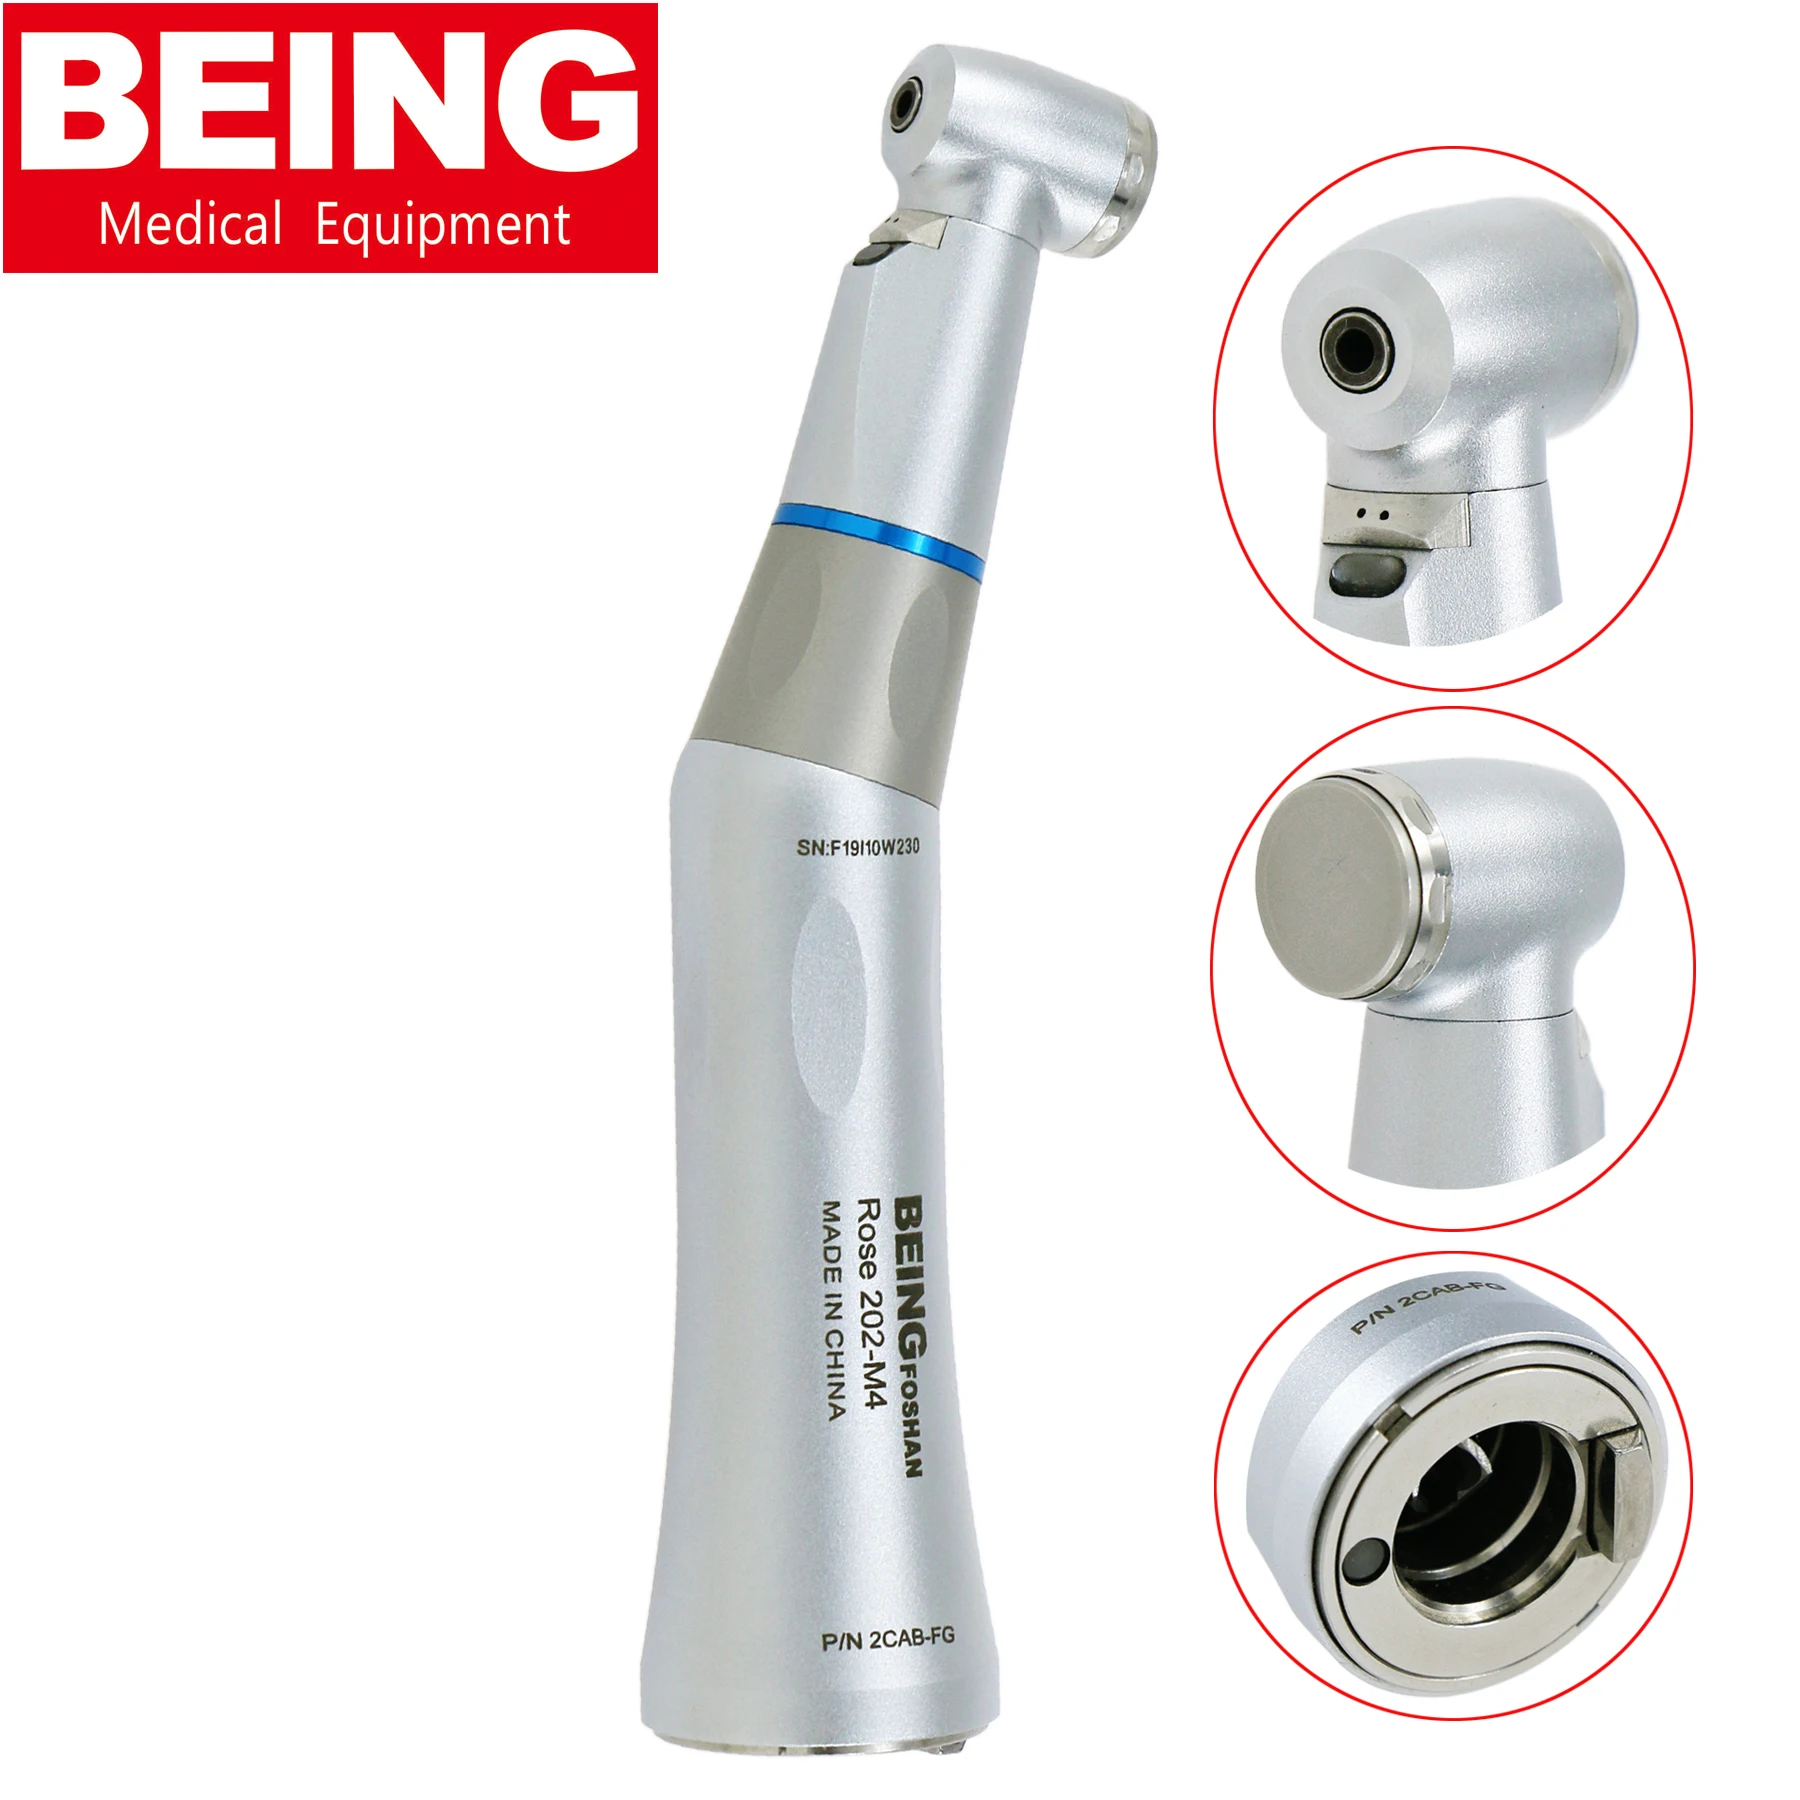 

BEING Dental Fiber Optic Low Speed Handpiece 1:1 Contra Angle Handpiece ISO E type 202CAPB-FG Fit KaVo